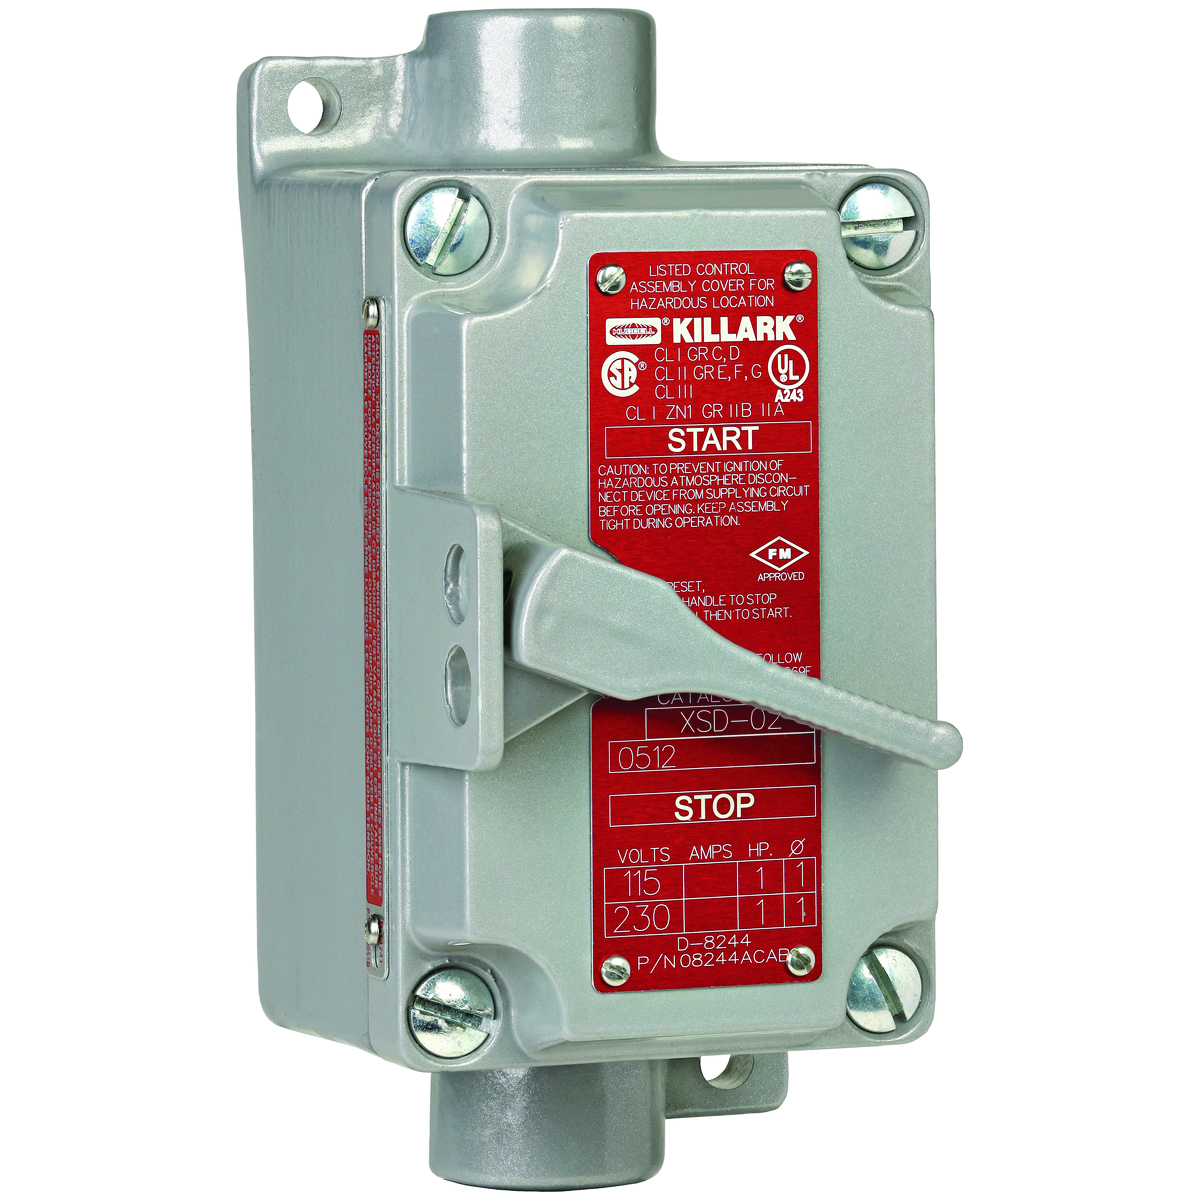 XSX SERIES - ALUMINUM SINGLE GANG 2-POLE, SINGLE PHASE MANUAL MOTORSTARTING SWITCH COVER AND SWITCH ASSEMBLY - WITHOUT OVERLOAD PROTECTION